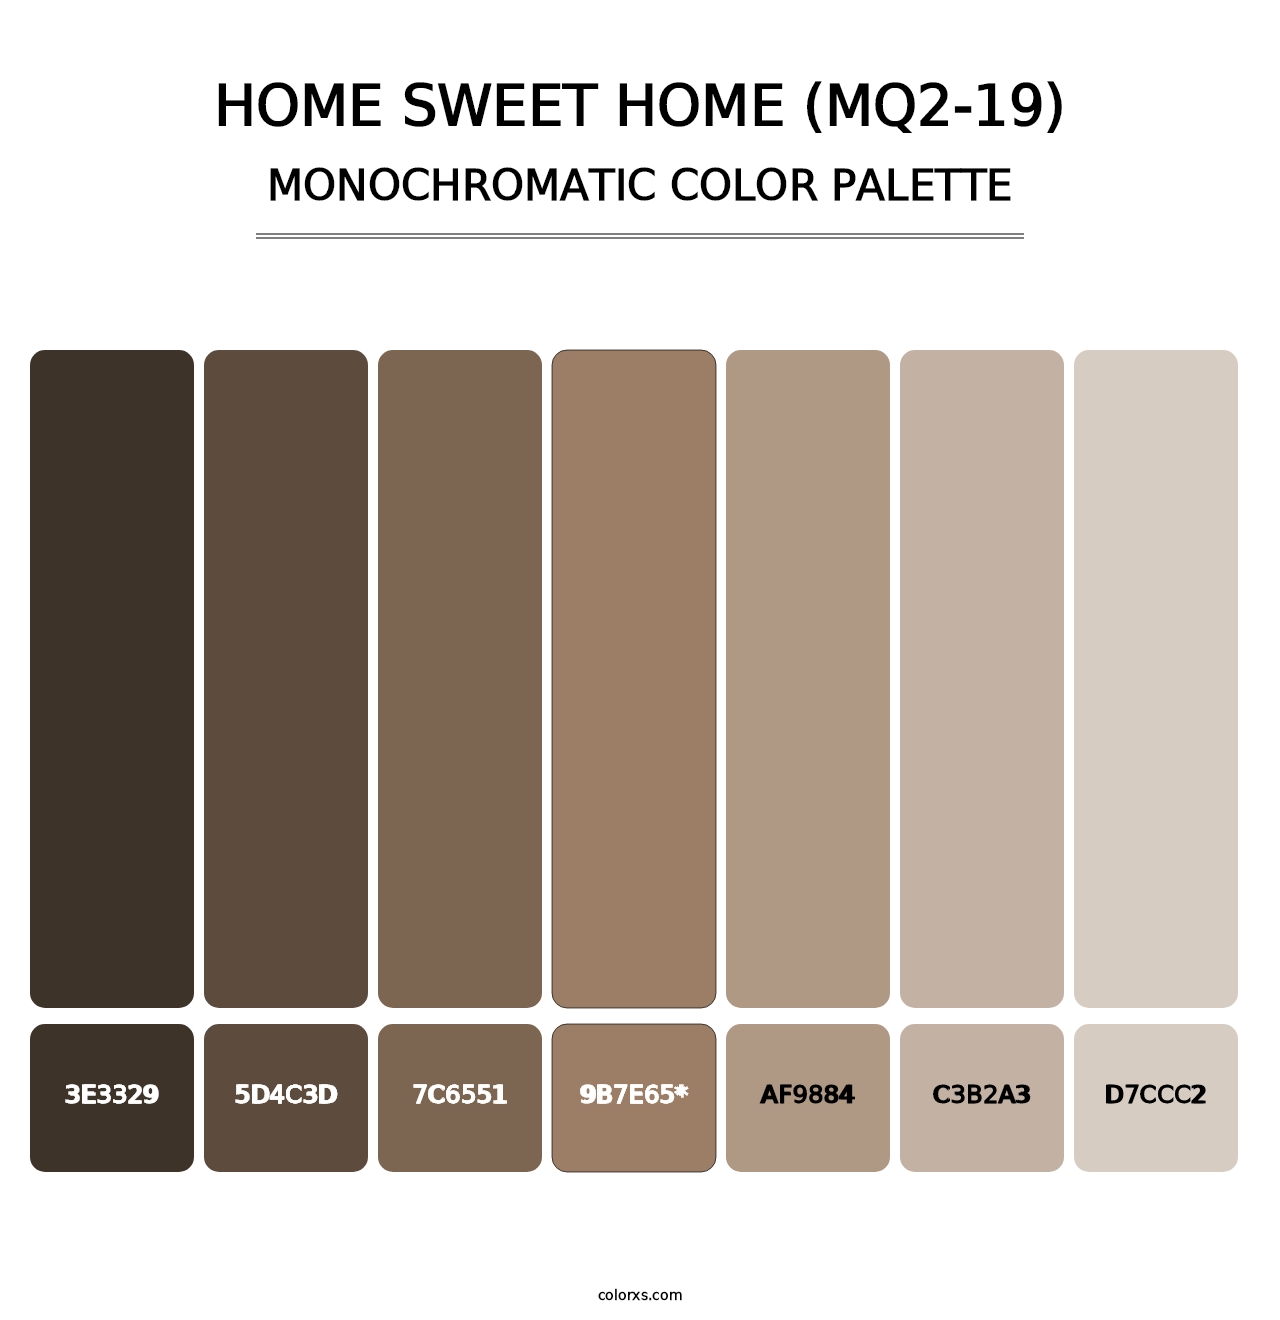 Home Sweet Home (MQ2-19) - Monochromatic Color Palette